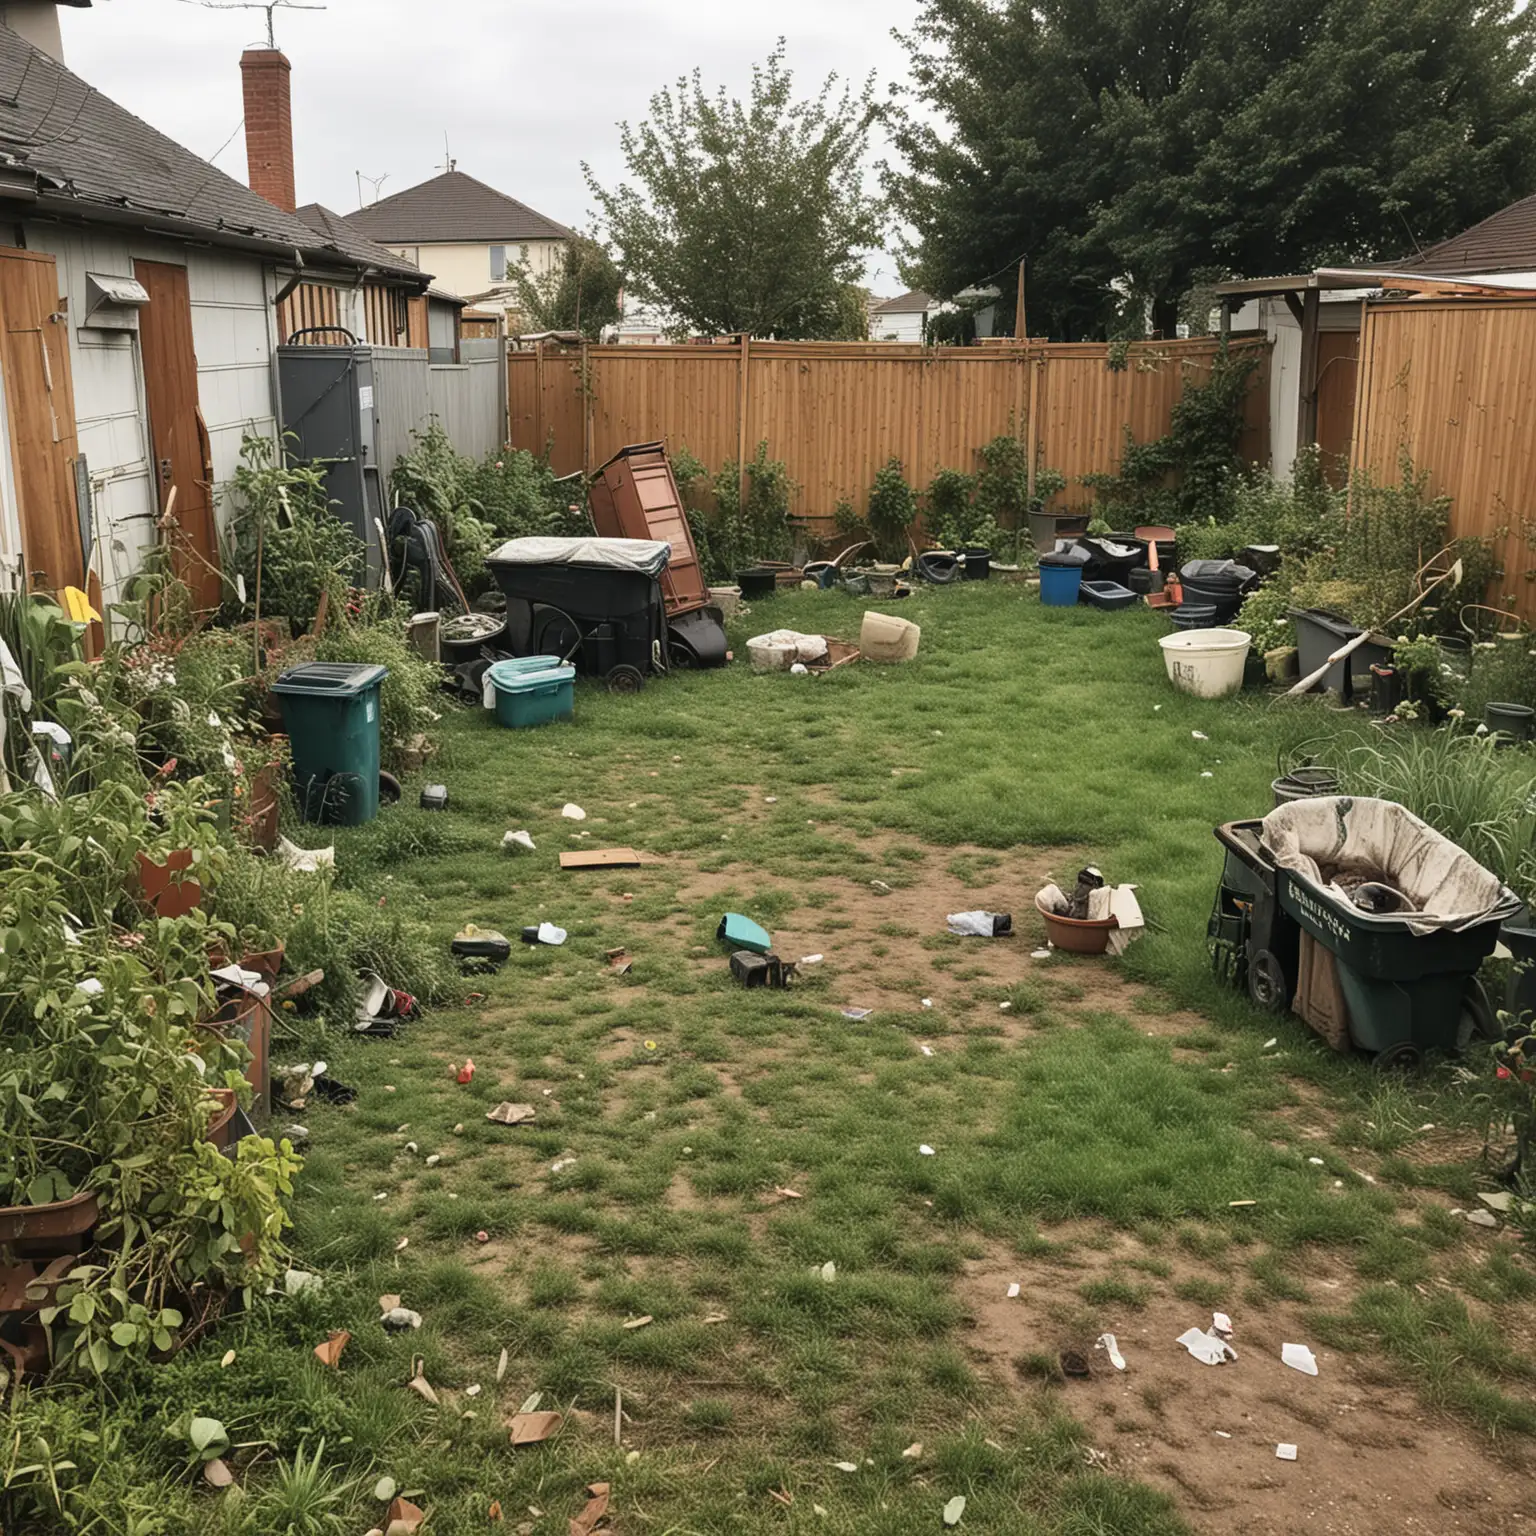 Messy and Cluttered Yard Scene with Neglected Items